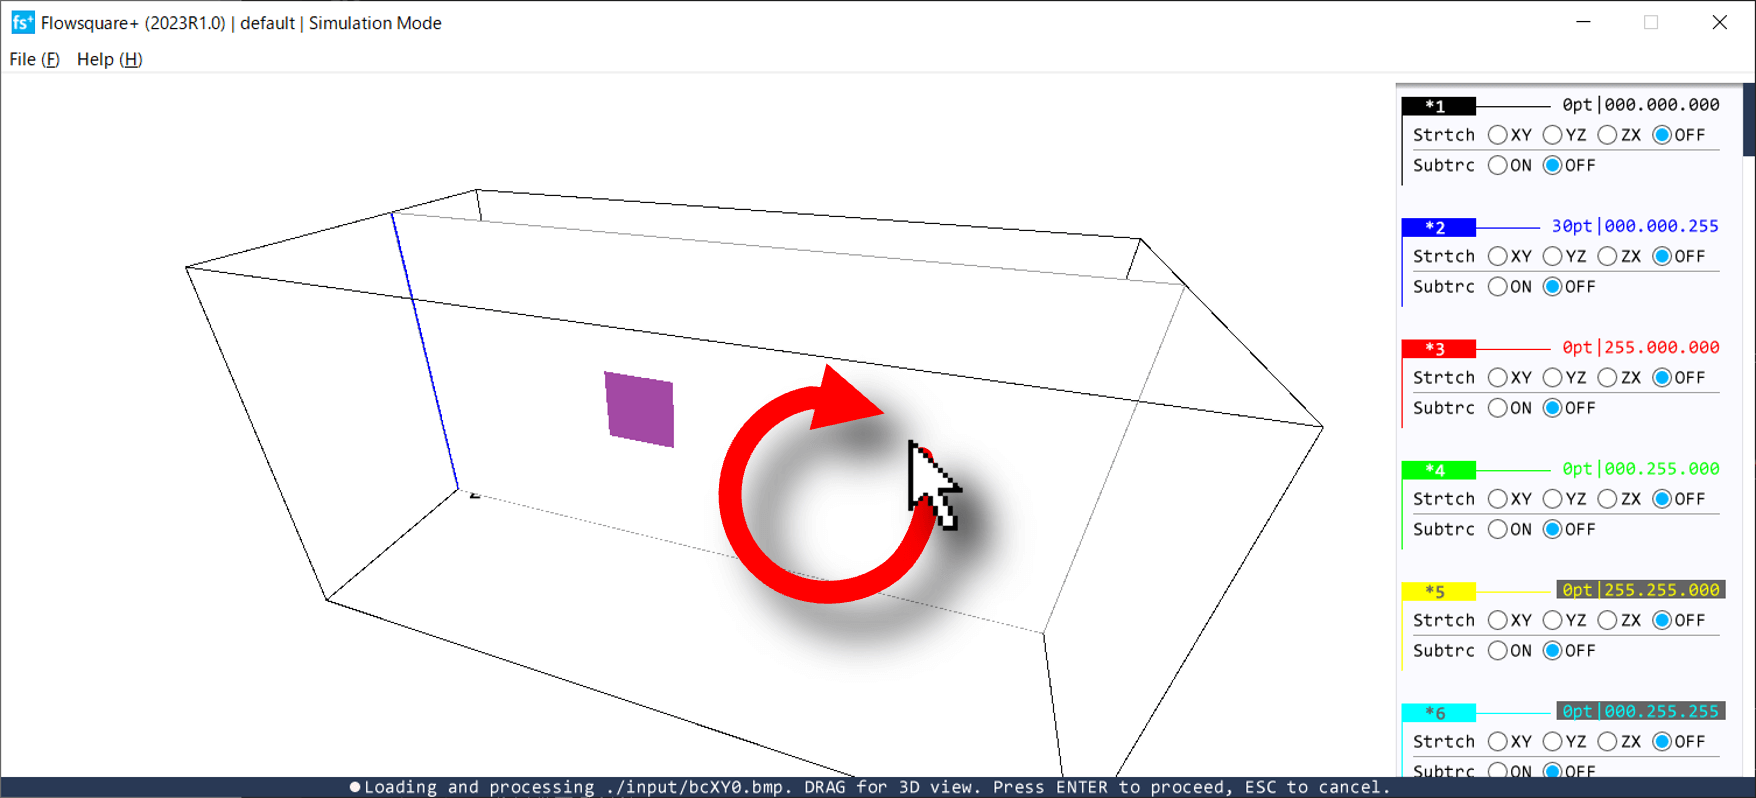 Direction of the boundary image (mouse drag)